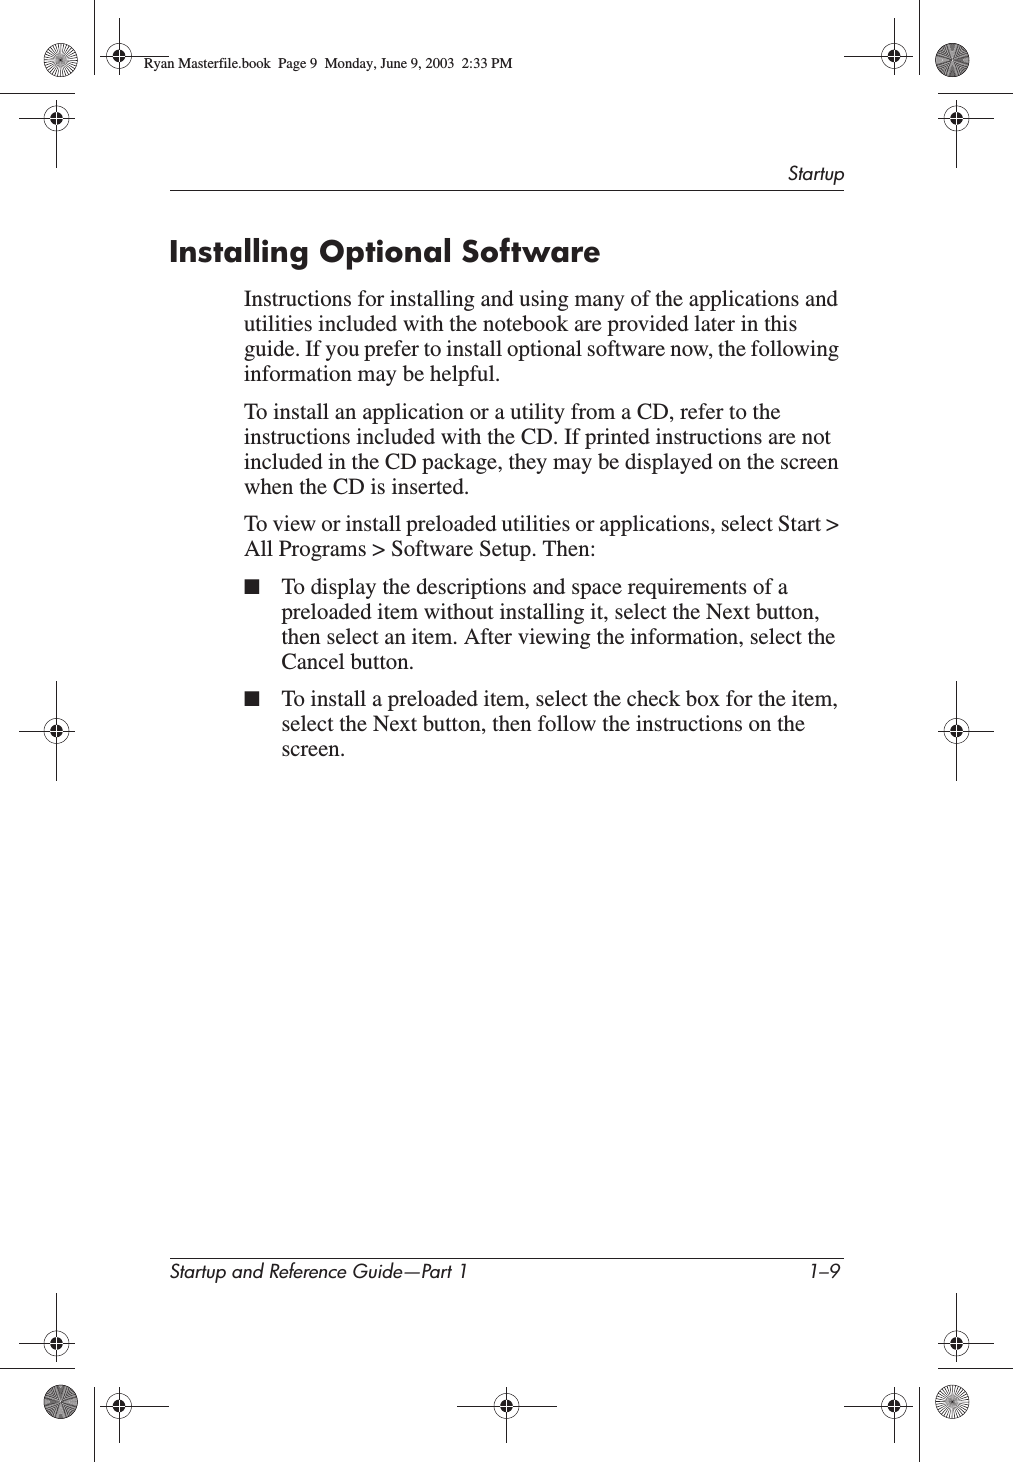 StartupStartup and Reference Guide—Part 1 1–9Installing Optional SoftwareInstructions for installing and using many of the applications and utilities included with the notebook are provided later in this guide. If you prefer to install optional software now, the following information may be helpful.To install an application or a utility from a CD, refer to the instructions included with the CD. If printed instructions are not included in the CD package, they may be displayed on the screen when the CD is inserted.To view or install preloaded utilities or applications, select Start &gt; All Programs &gt; Software Setup. Then:■To display the descriptions and space requirements of a preloaded item without installing it, select the Next button, then select an item. After viewing the information, select the Cancel button.■To install a preloaded item, select the check box for the item, select the Next button, then follow the instructions on the screen.Ryan Masterfile.book  Page 9  Monday, June 9, 2003  2:33 PM